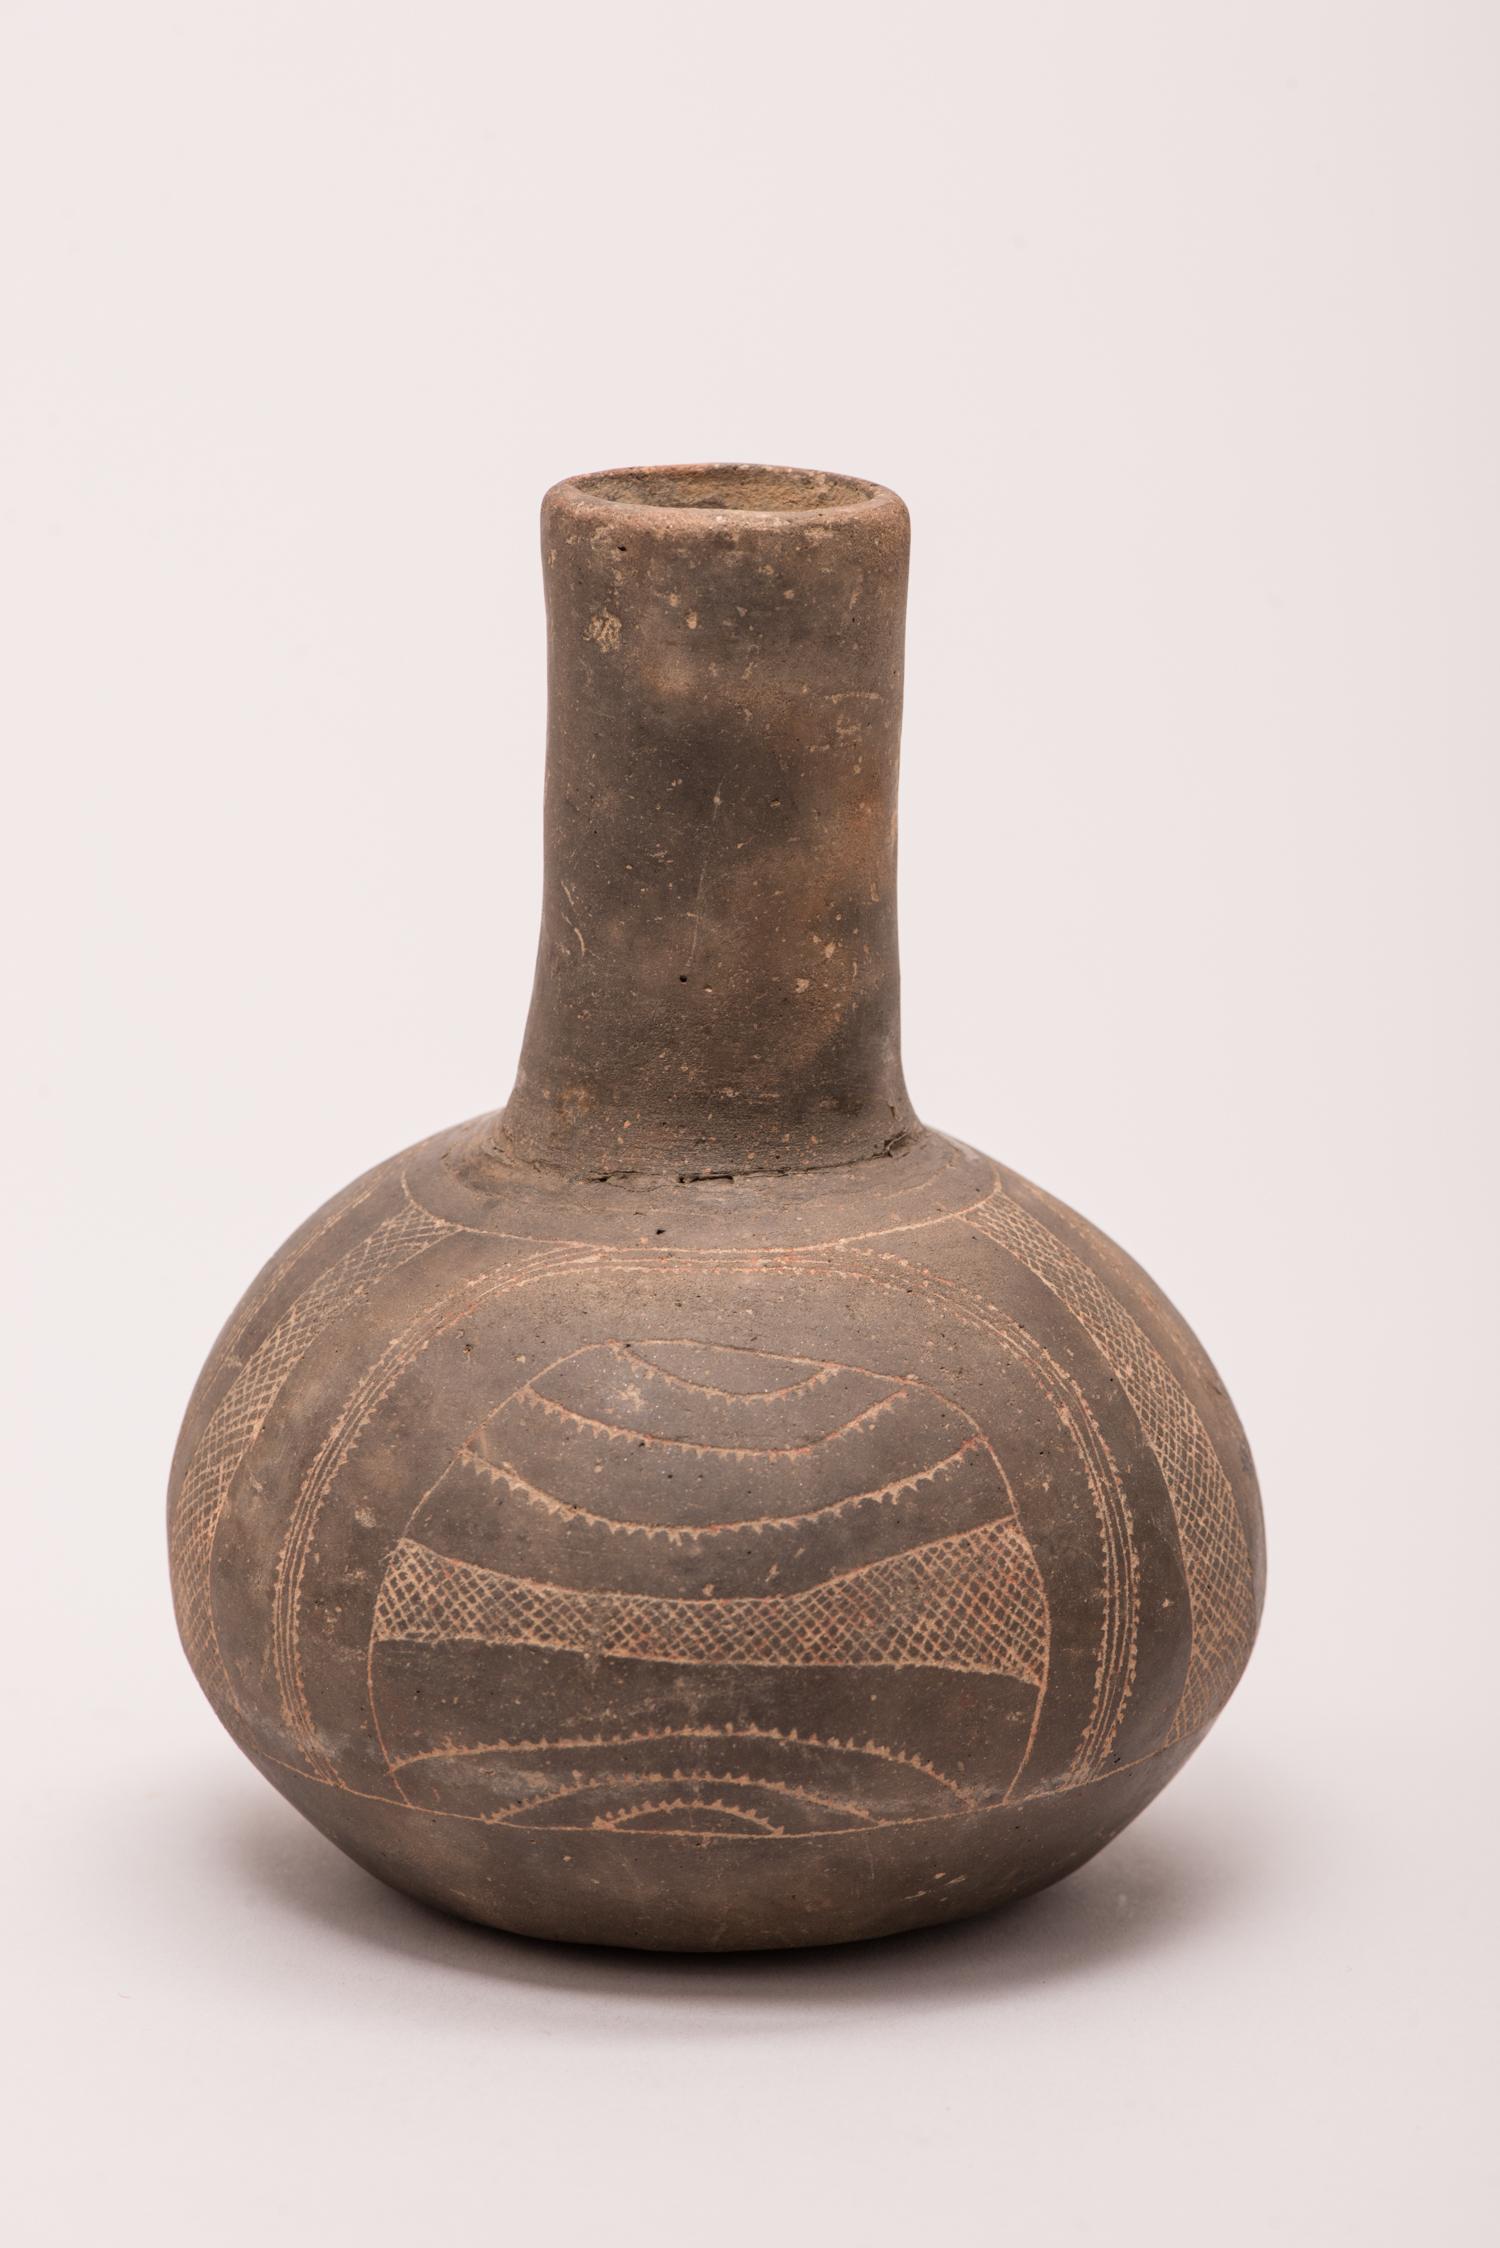 18th Century and Earlier Pre-Contact Native American Engraved Ceramic Bottle